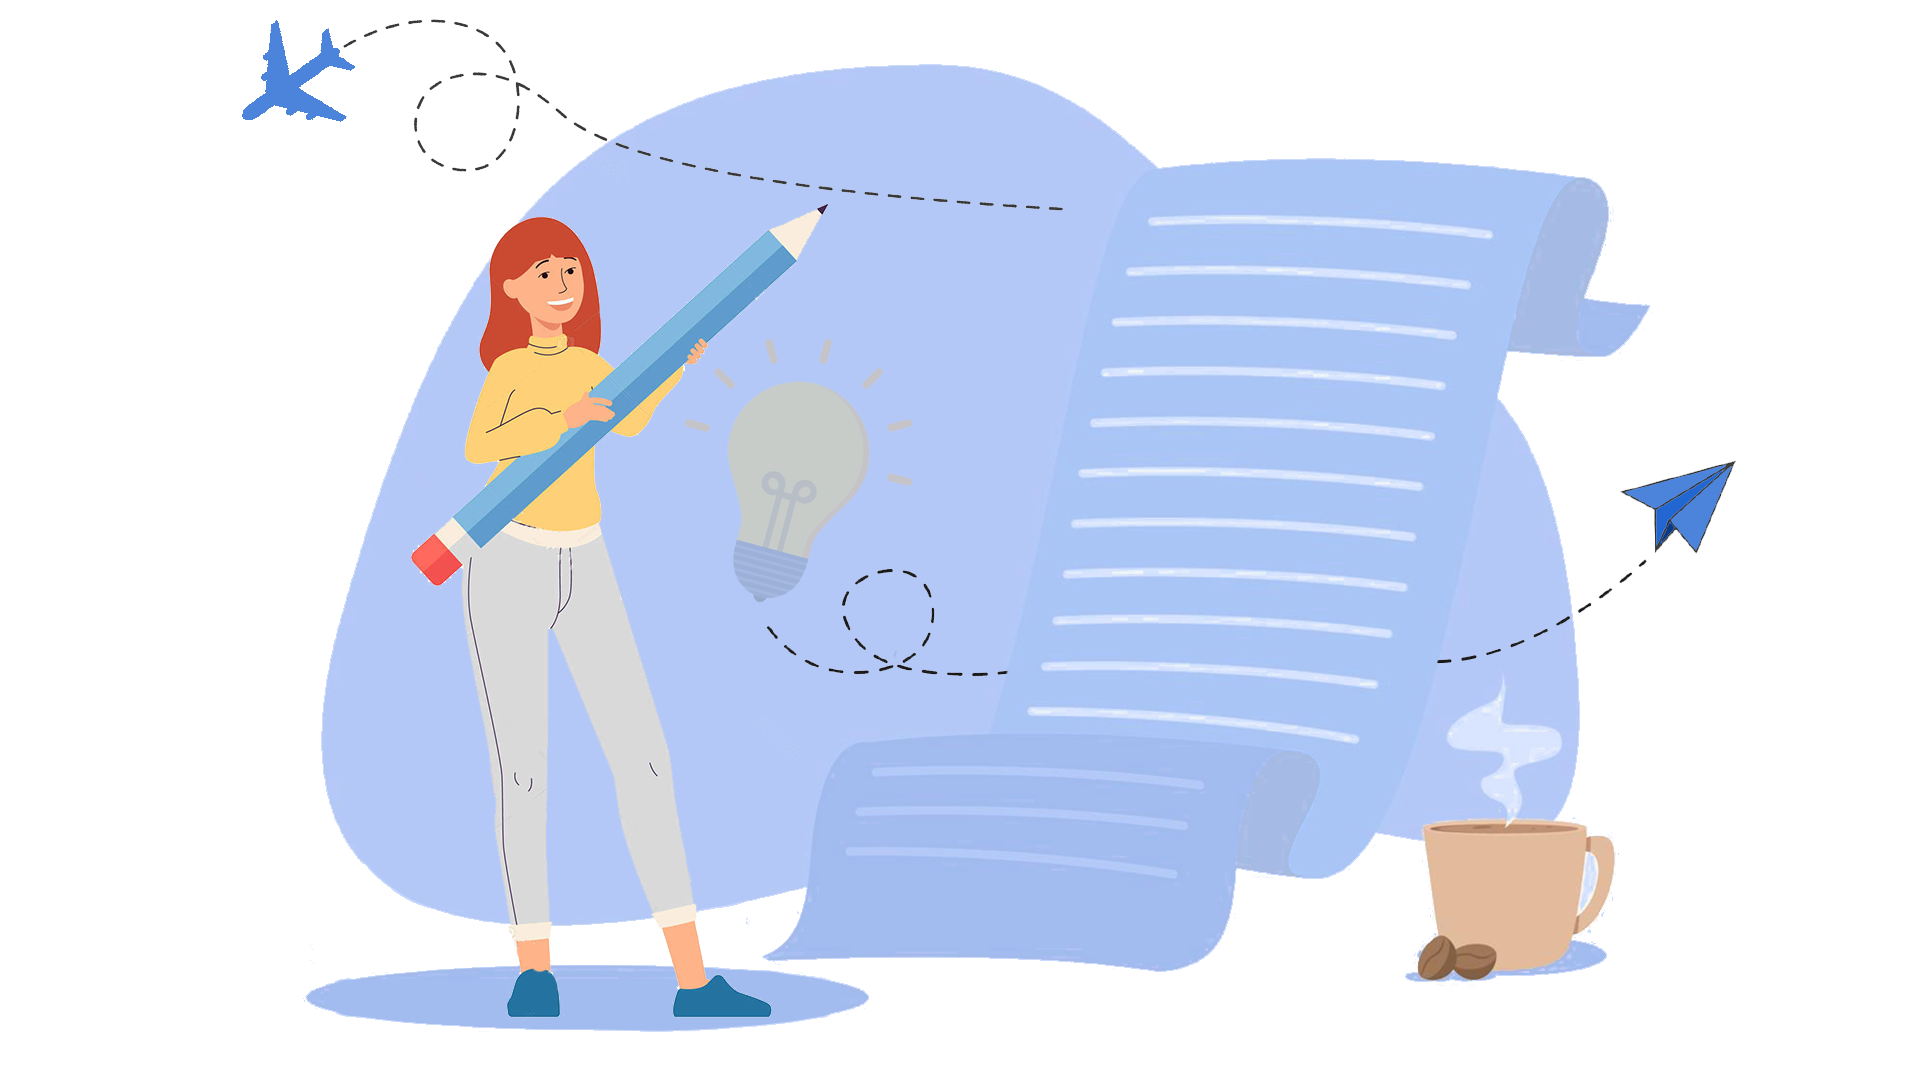 A vector illustration of a girl holding a pen and pointing towards a piece of paper with content.